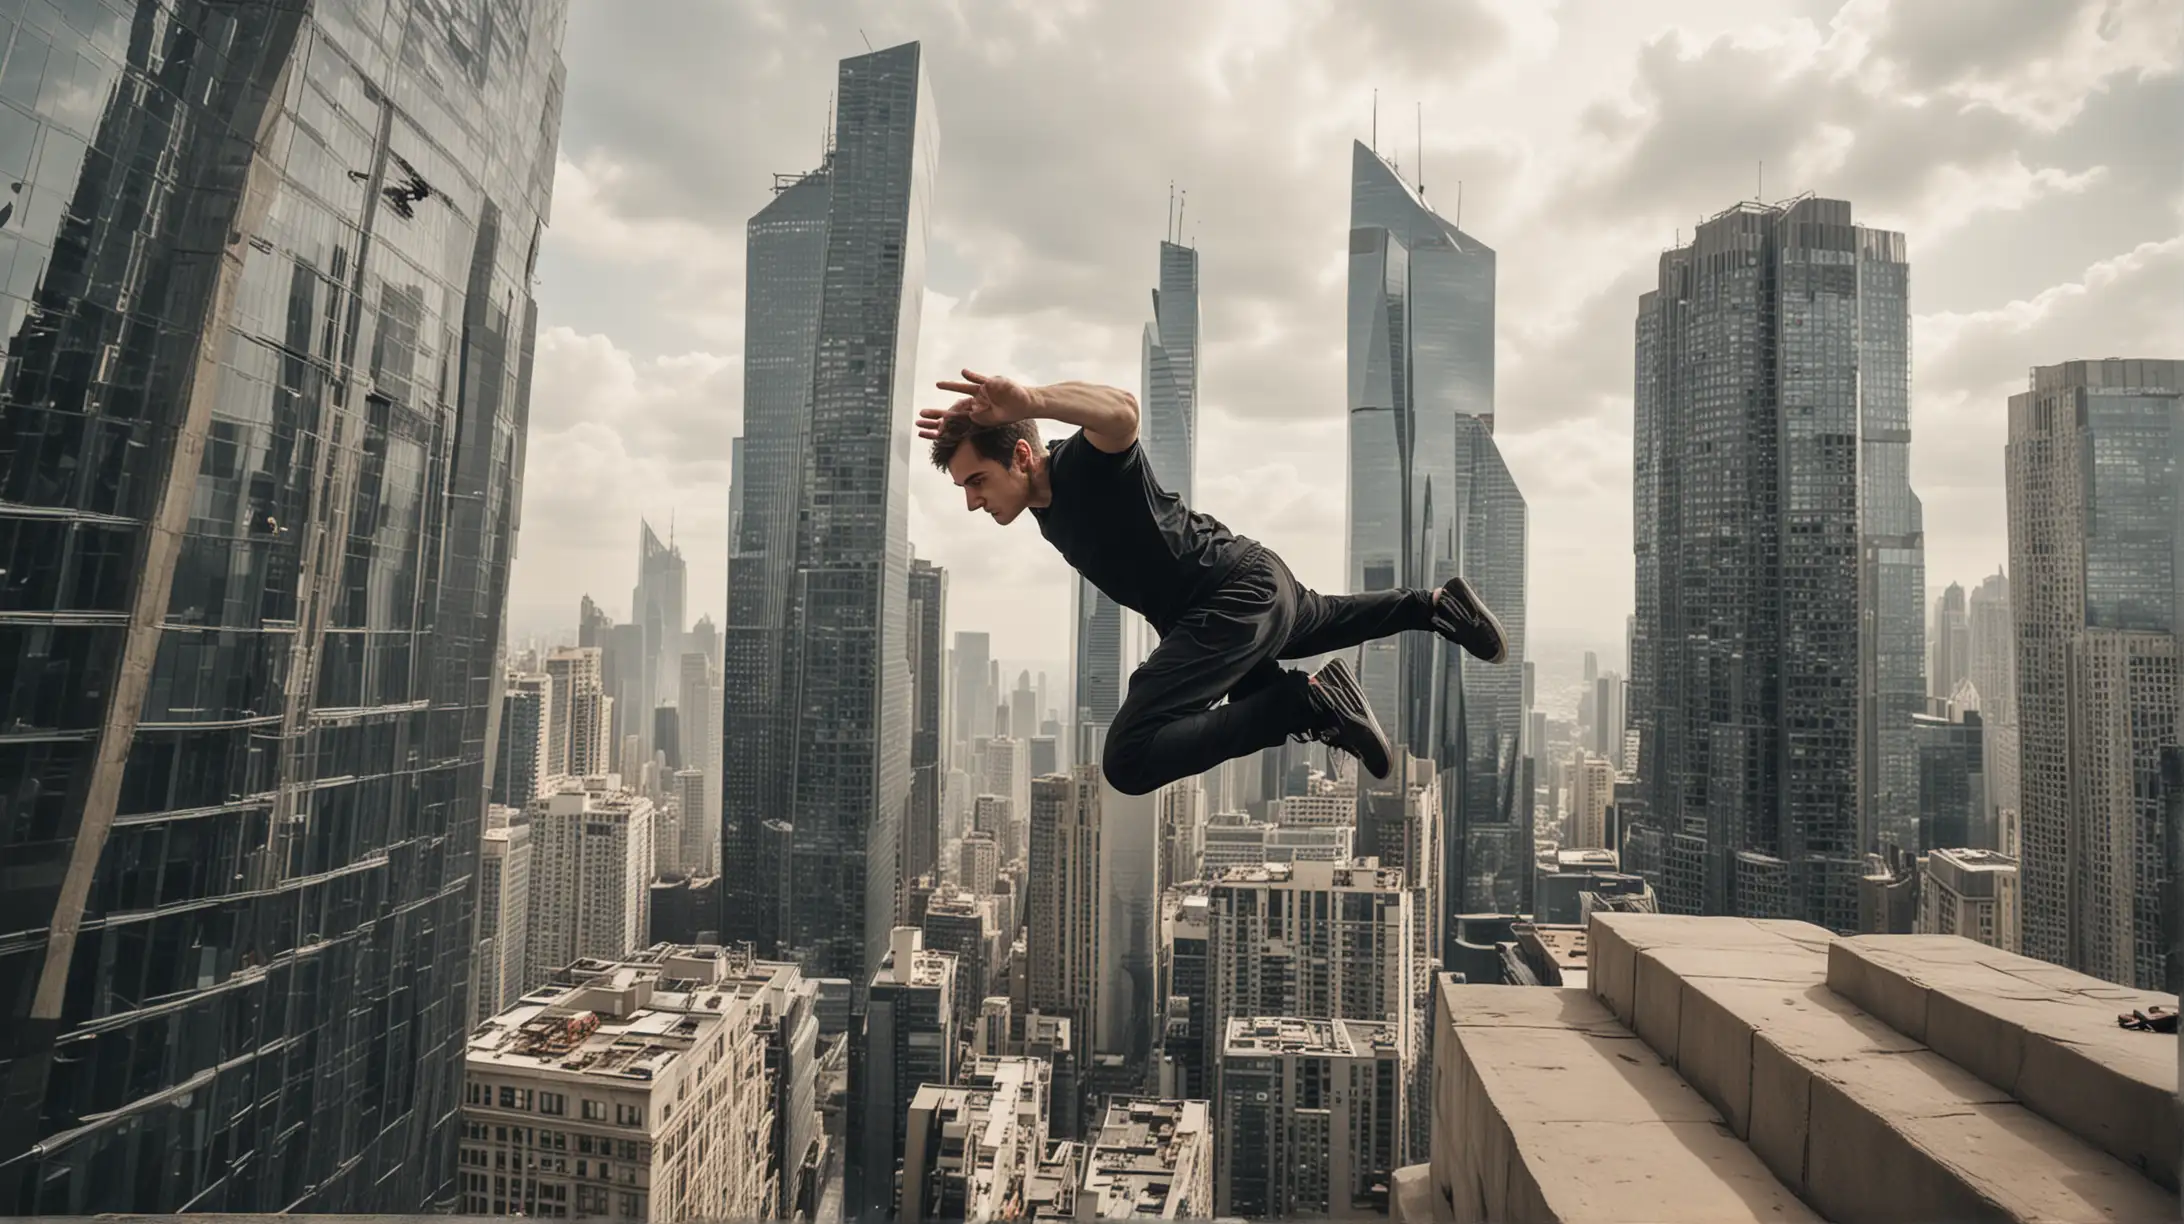 parkour athlete performing a precision jump between two skyscrapers, captured mid-action with a breathtaking city backdrop."